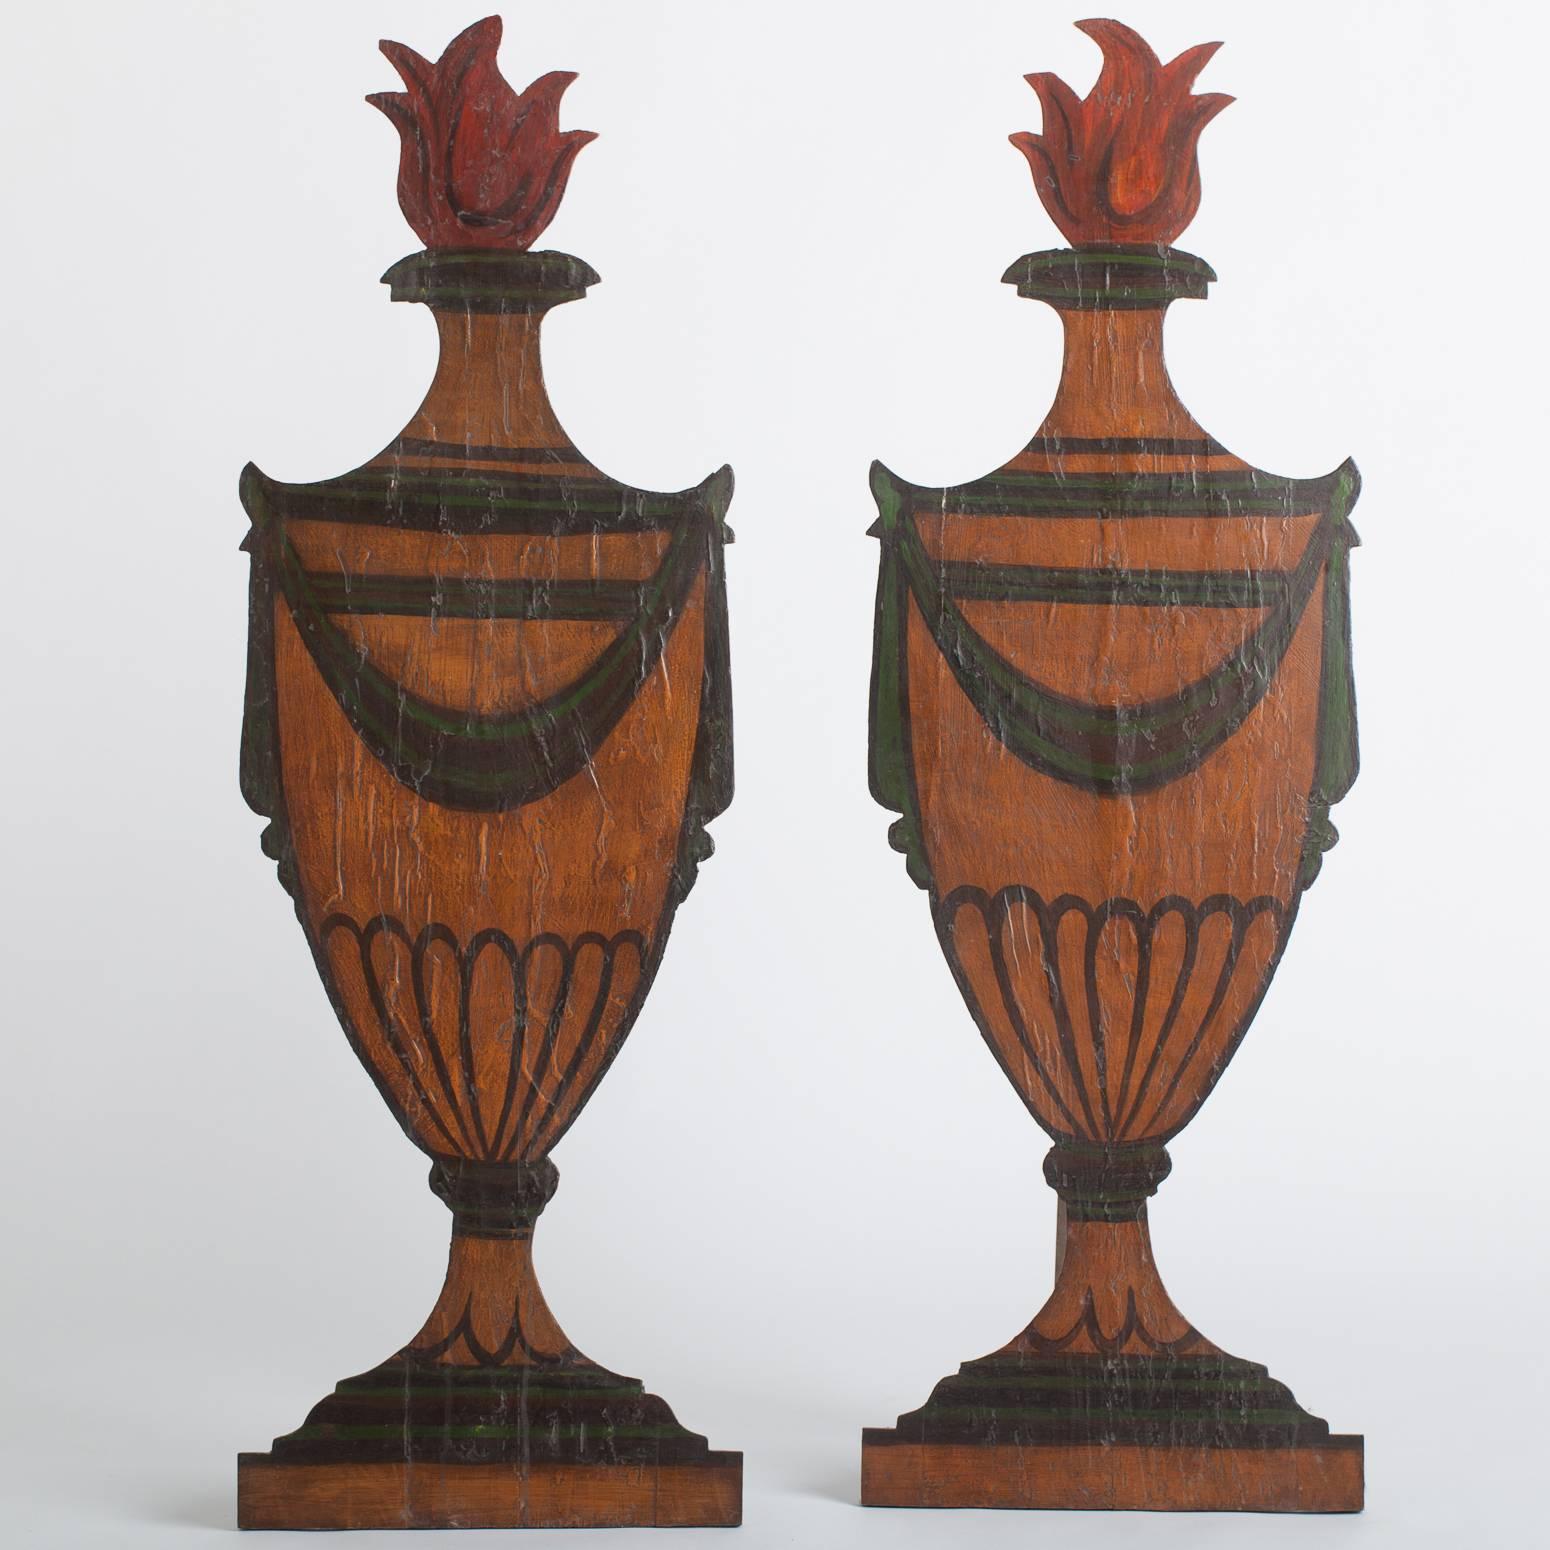 These painted wooden urns might have been part of a 19th century stage set depicting a fanciful garden. They have wooden back supports to display them at an angle but also have hangers allowing them to hang on a wall as a decorative element. There